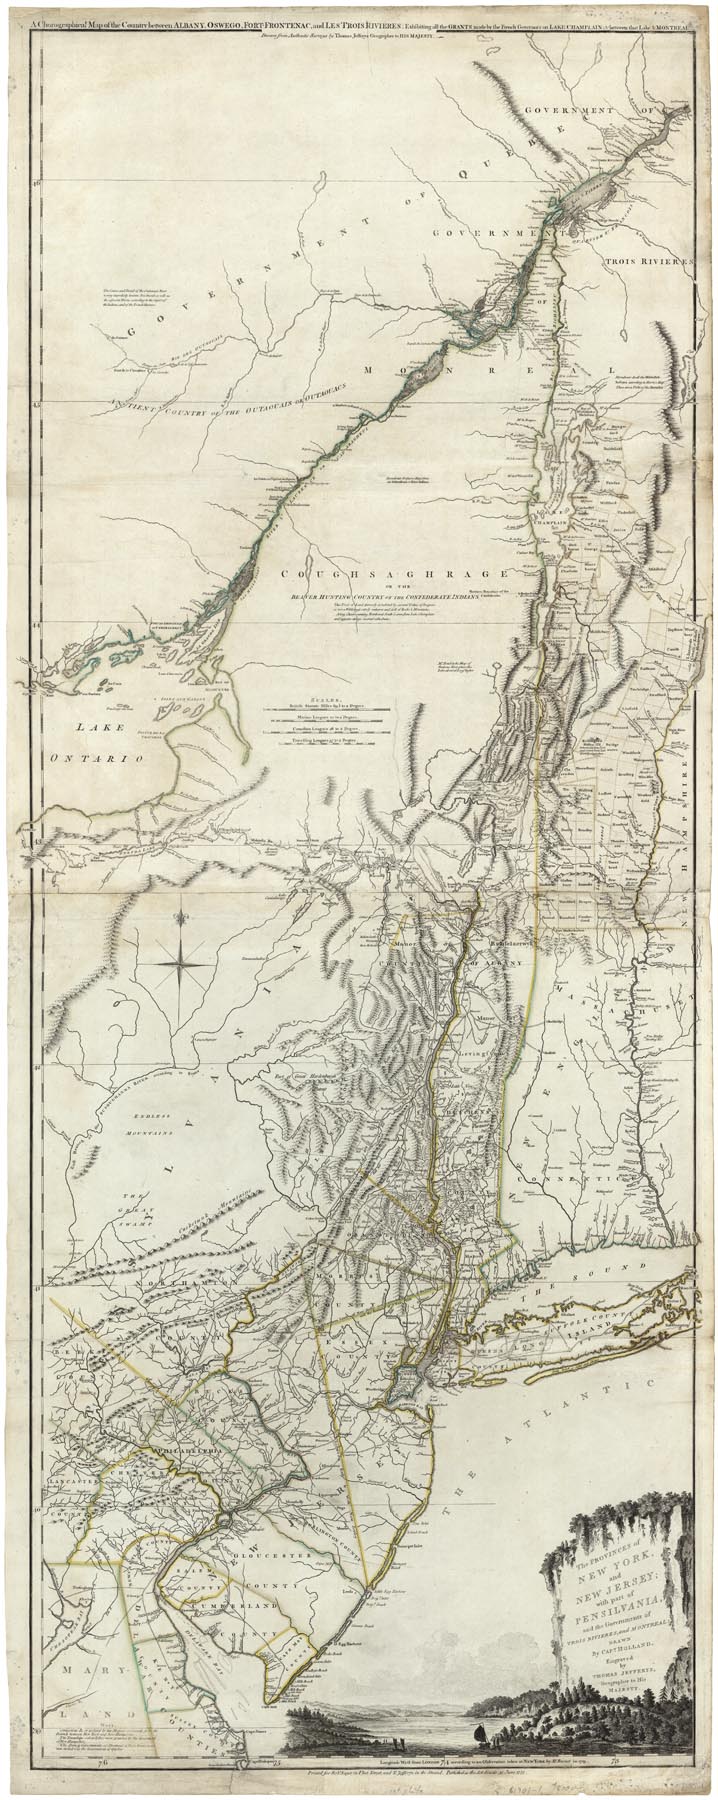 The Provinces of New York and New Jersey with part of Pensilvania, and the Goverments of Trois Riveres, and Montreal; Drawn by Capt. Holland. Engraved by Thomas Jefferys, Geographer to His Majesty.